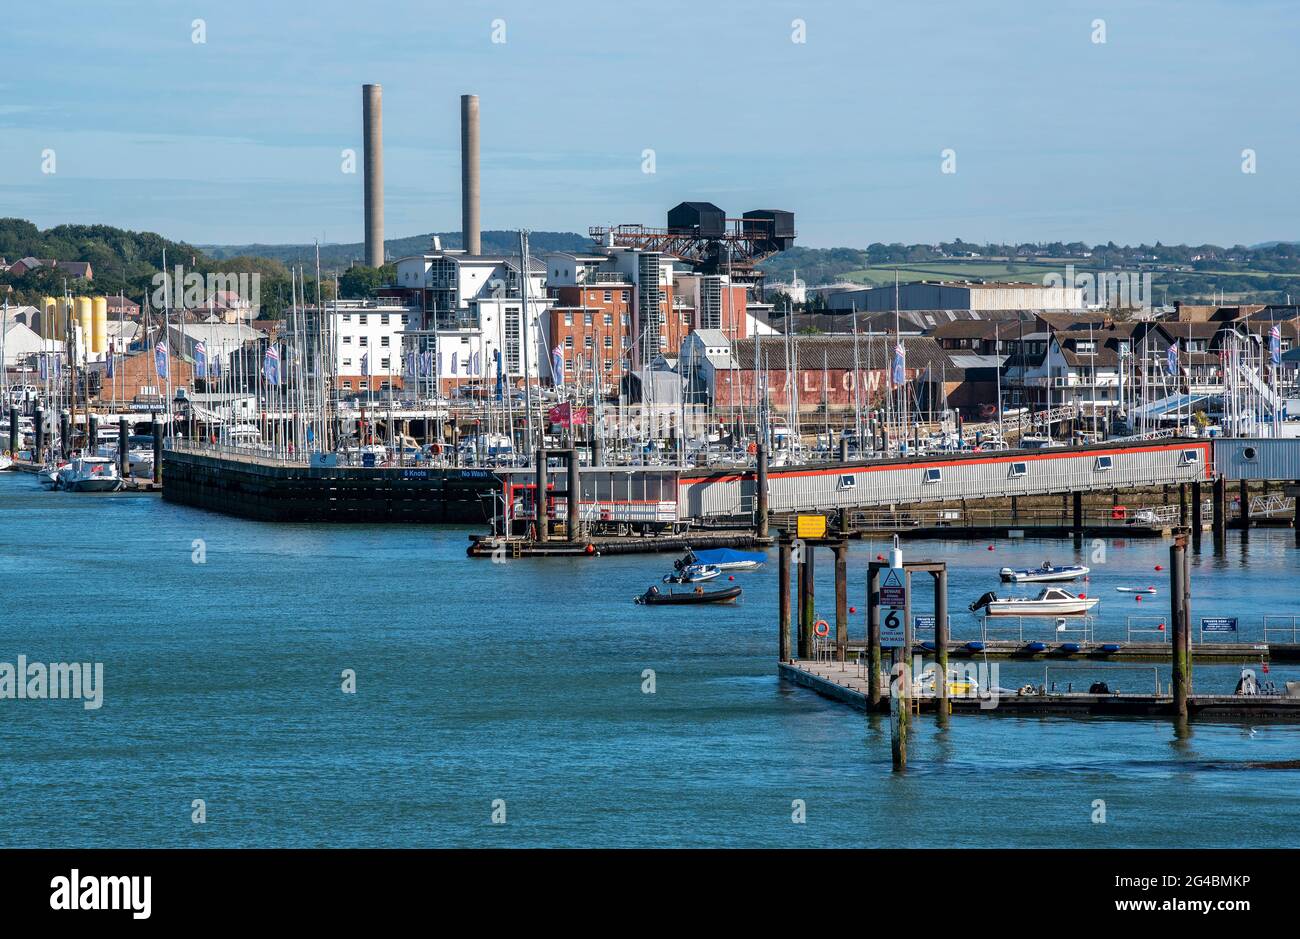 Cowes, Isle of Wight, England, UK. 2021. Cowes viewed along the waterfront of the River Medina showing chimneys of the power station, marinas and land Stock Photo